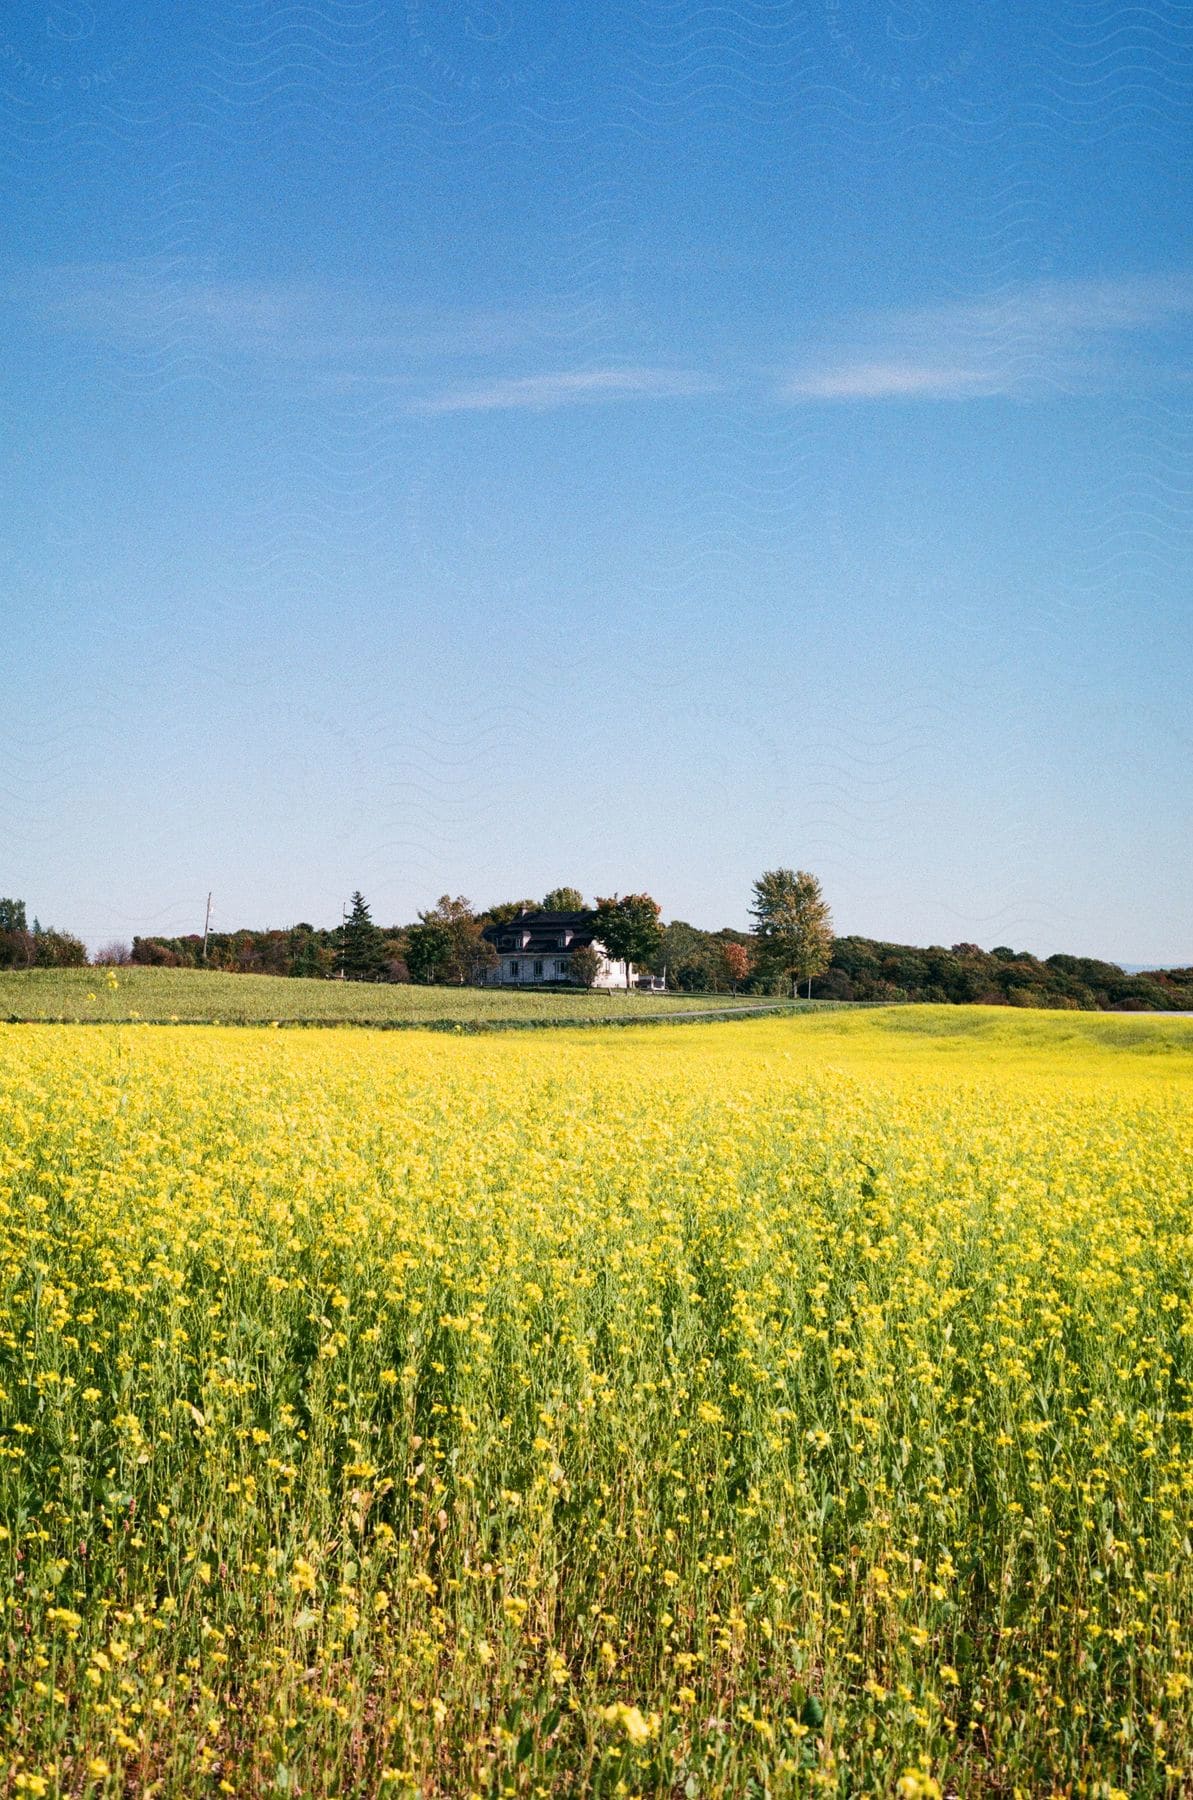 Vast field with the Rape plant and in the background a house.